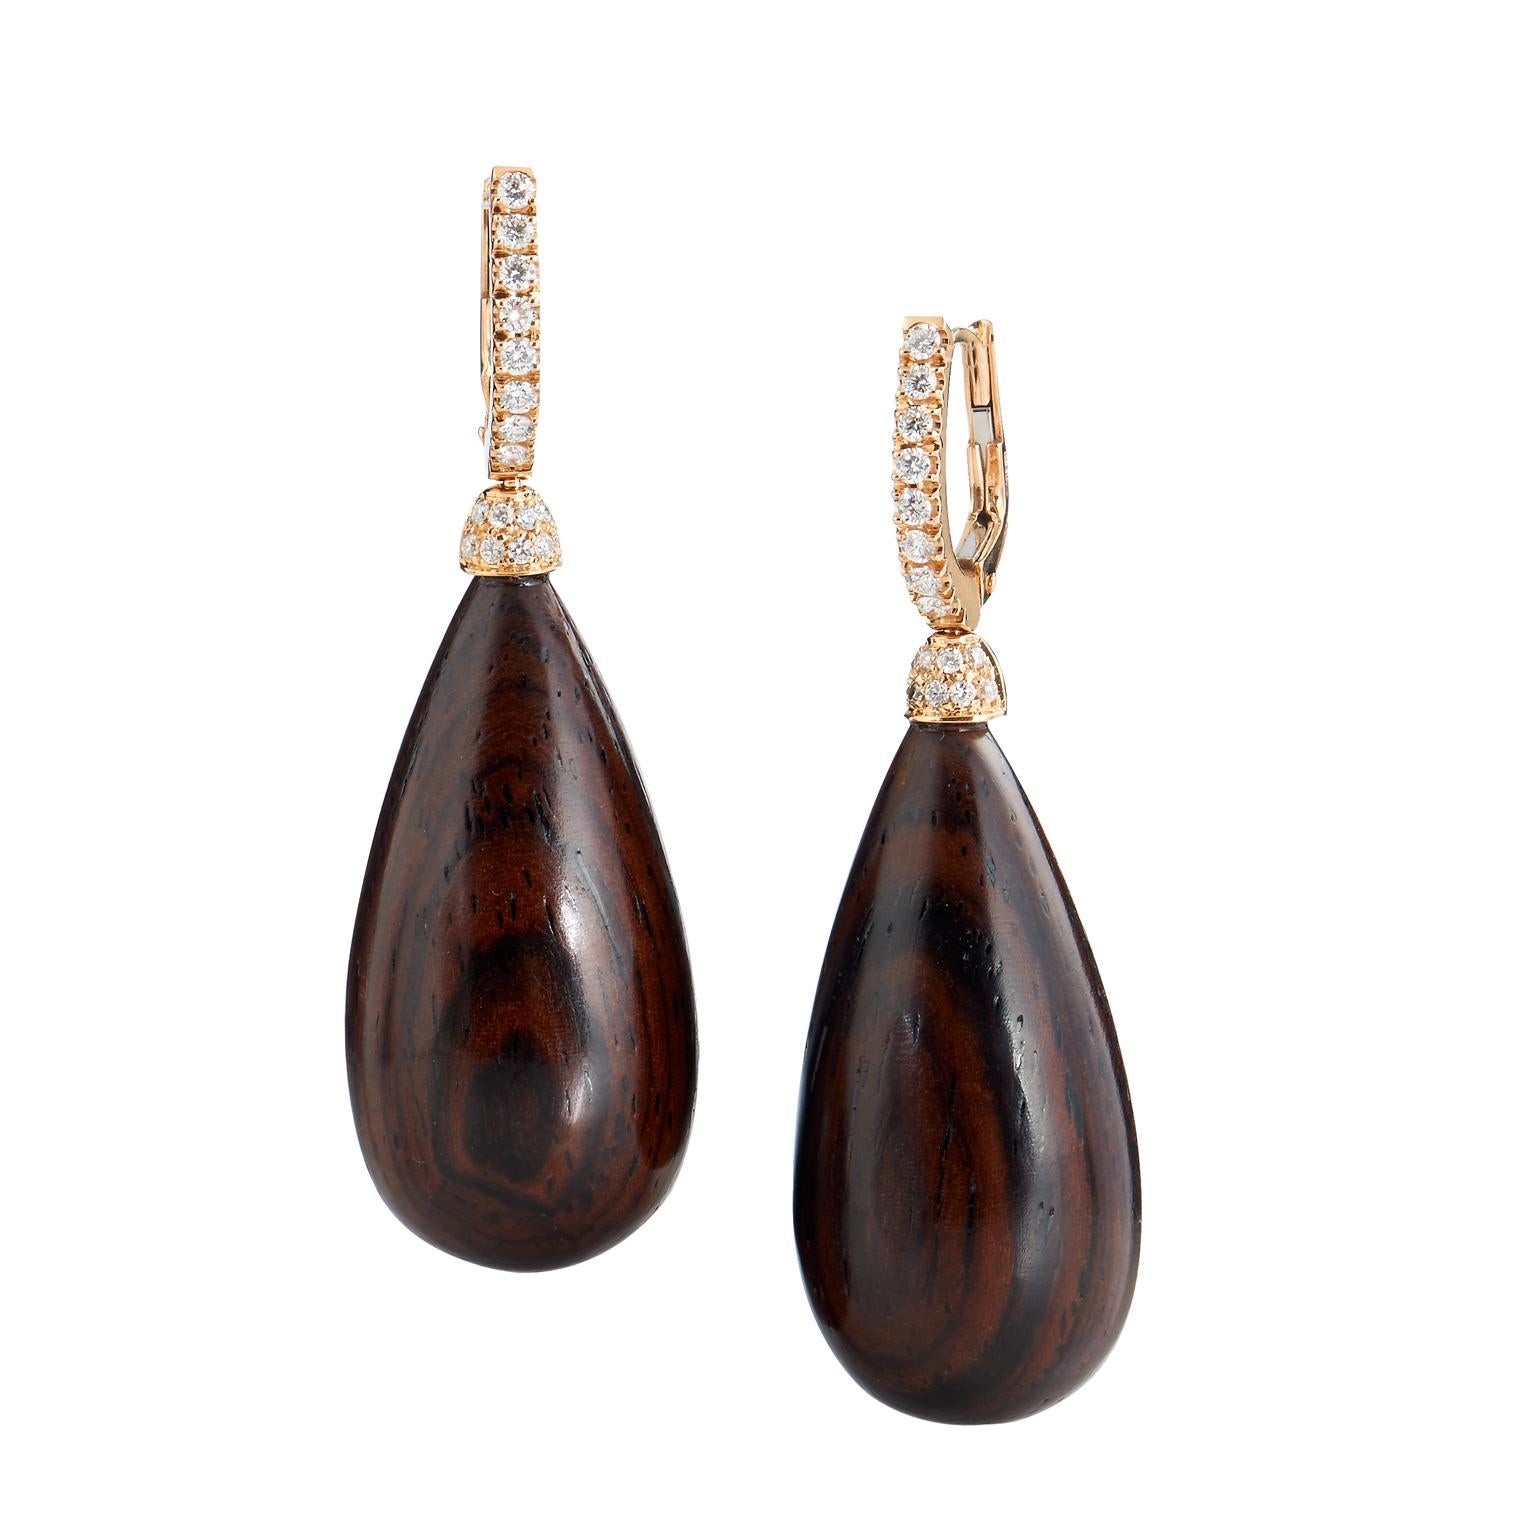 Round Cut Handcrafted Cocobolo Wood and Diamond Earrings in 18 Karat Rose Gold